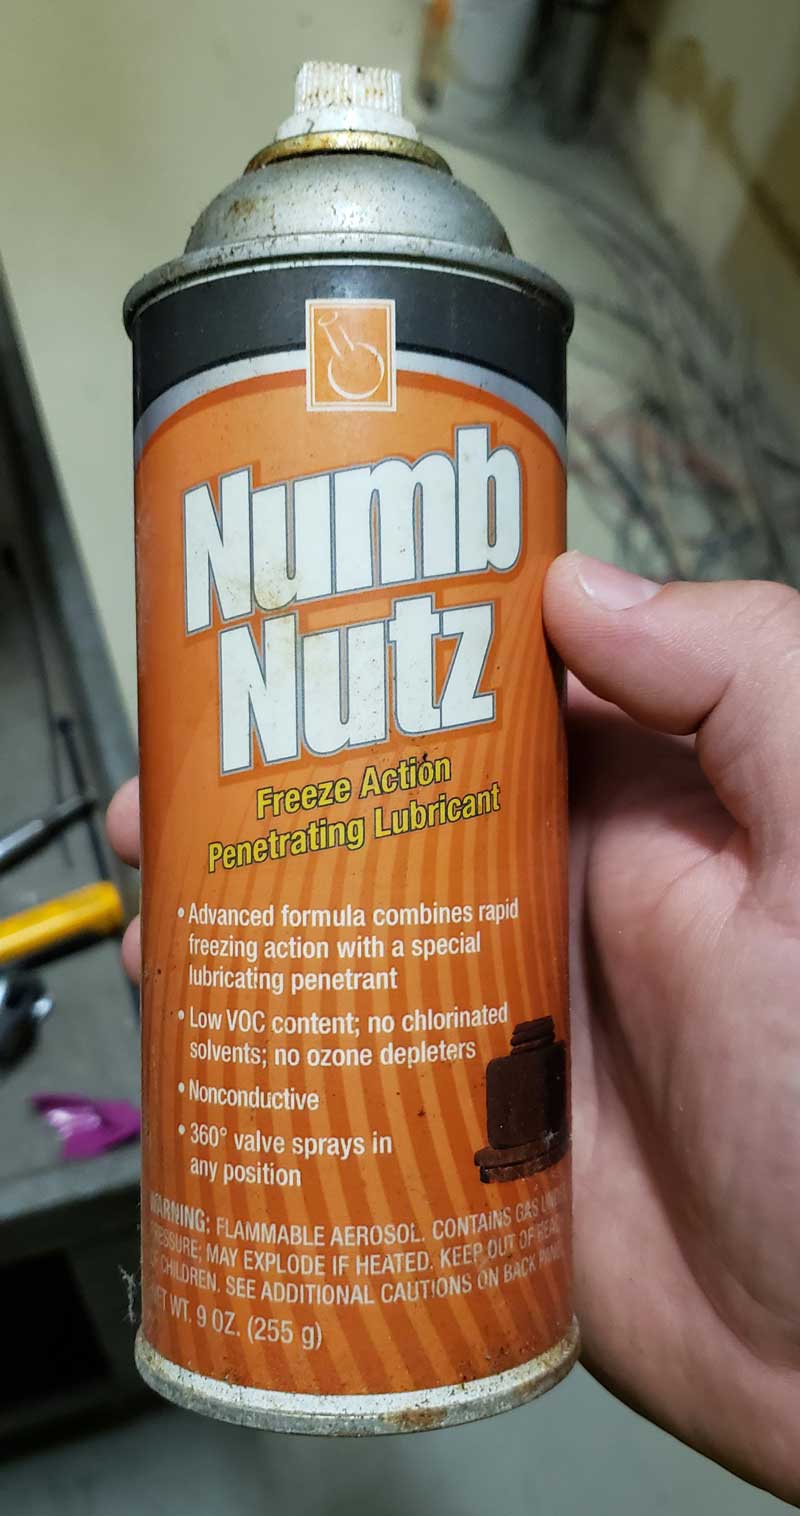 Just found an old can of lubricant